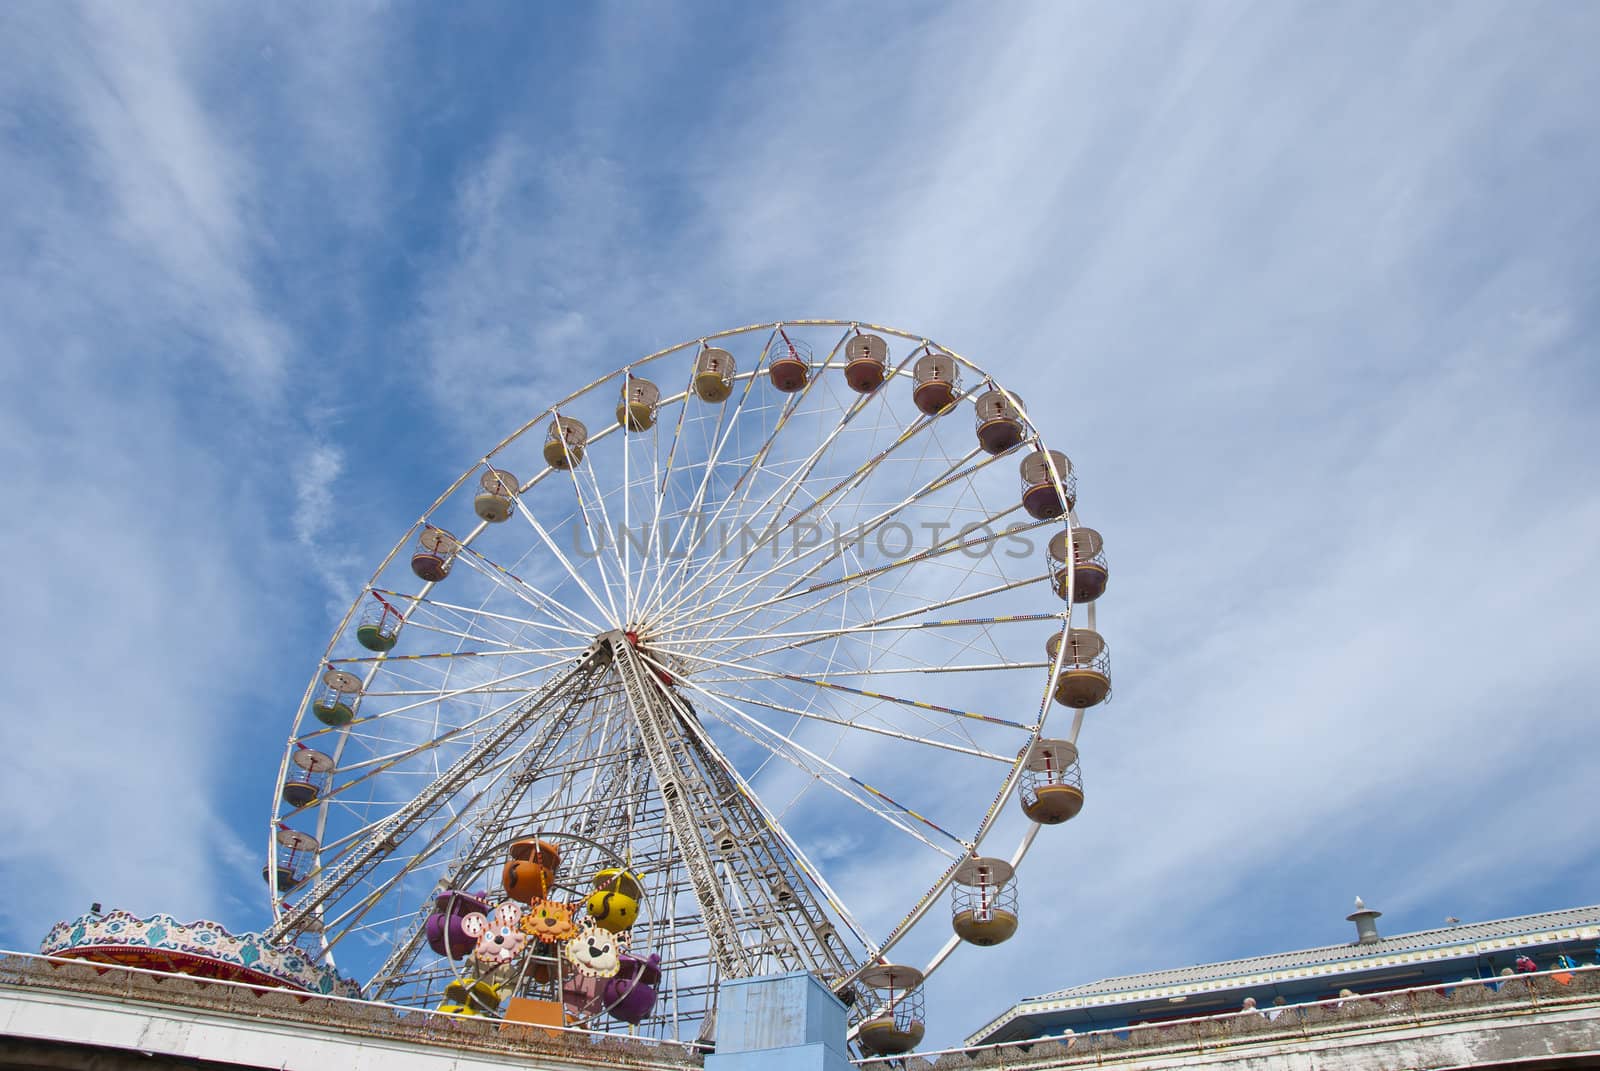 Fairground Wheel and Pier8 by d40xboy